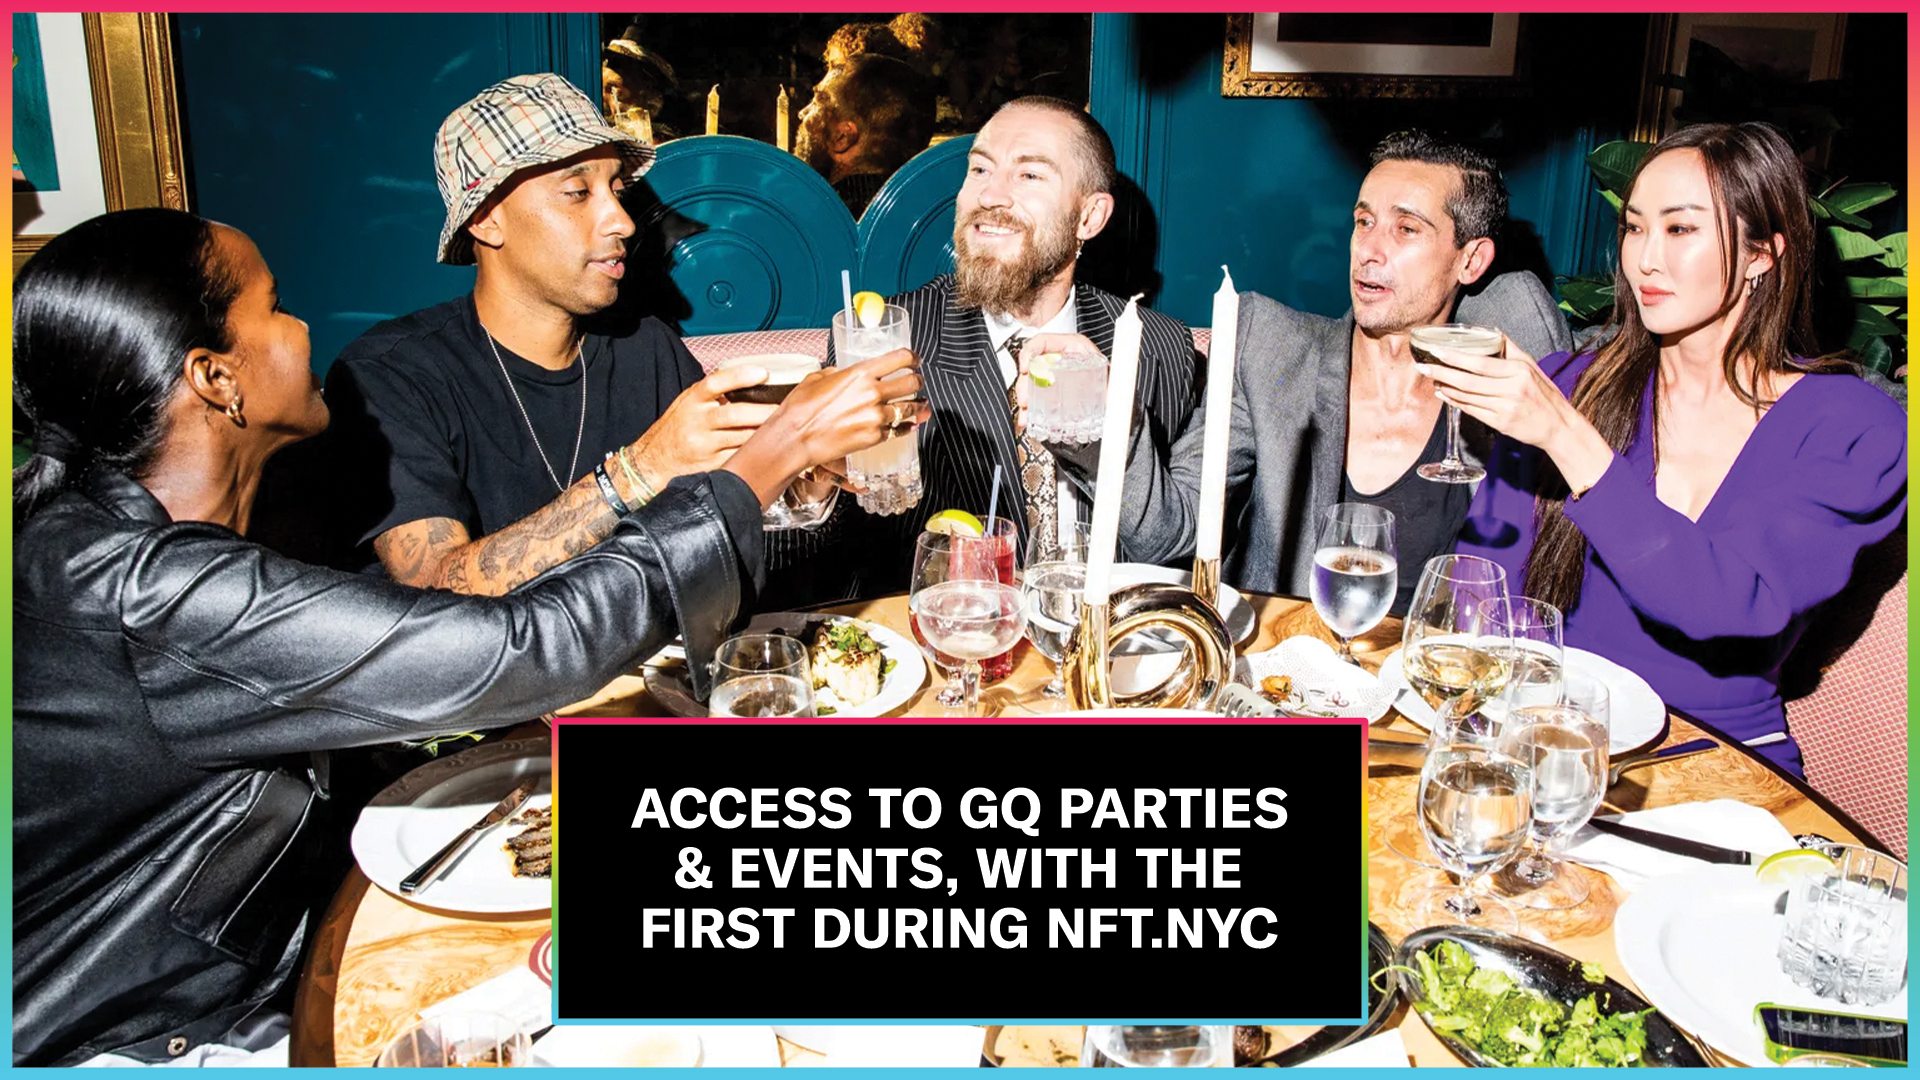 Access to the first-ever GQ3 party in New York City